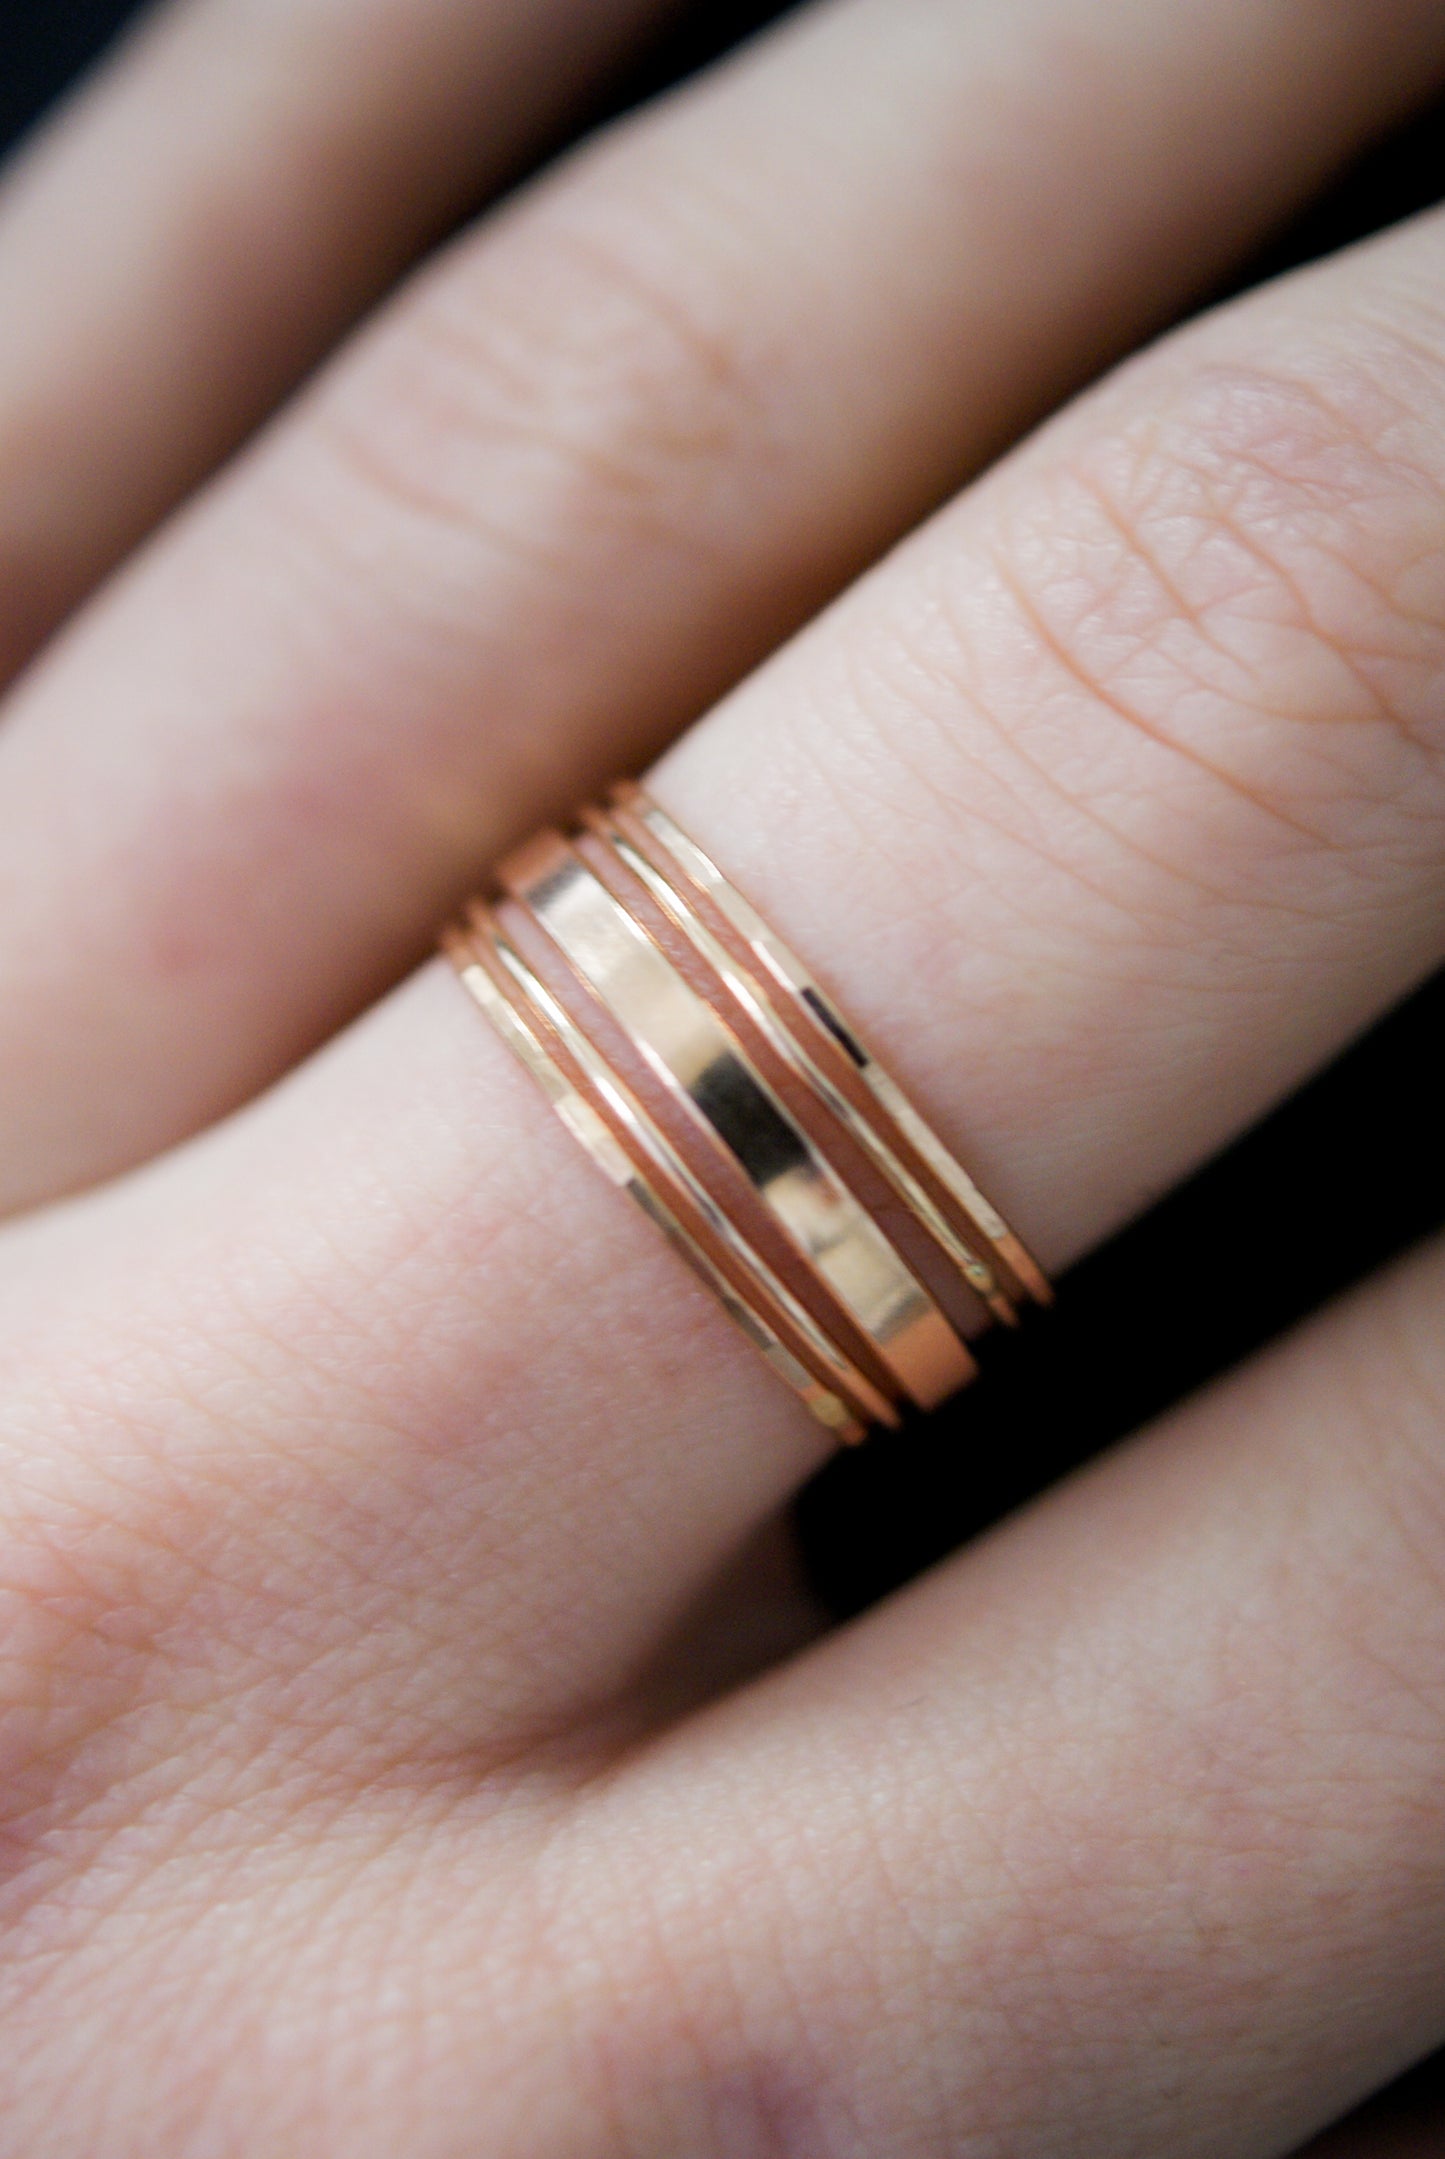 The Minimal Mirror Set of 5 Stacking Rings, Gold Fill, Rose Gold Fill or Sterling Silver